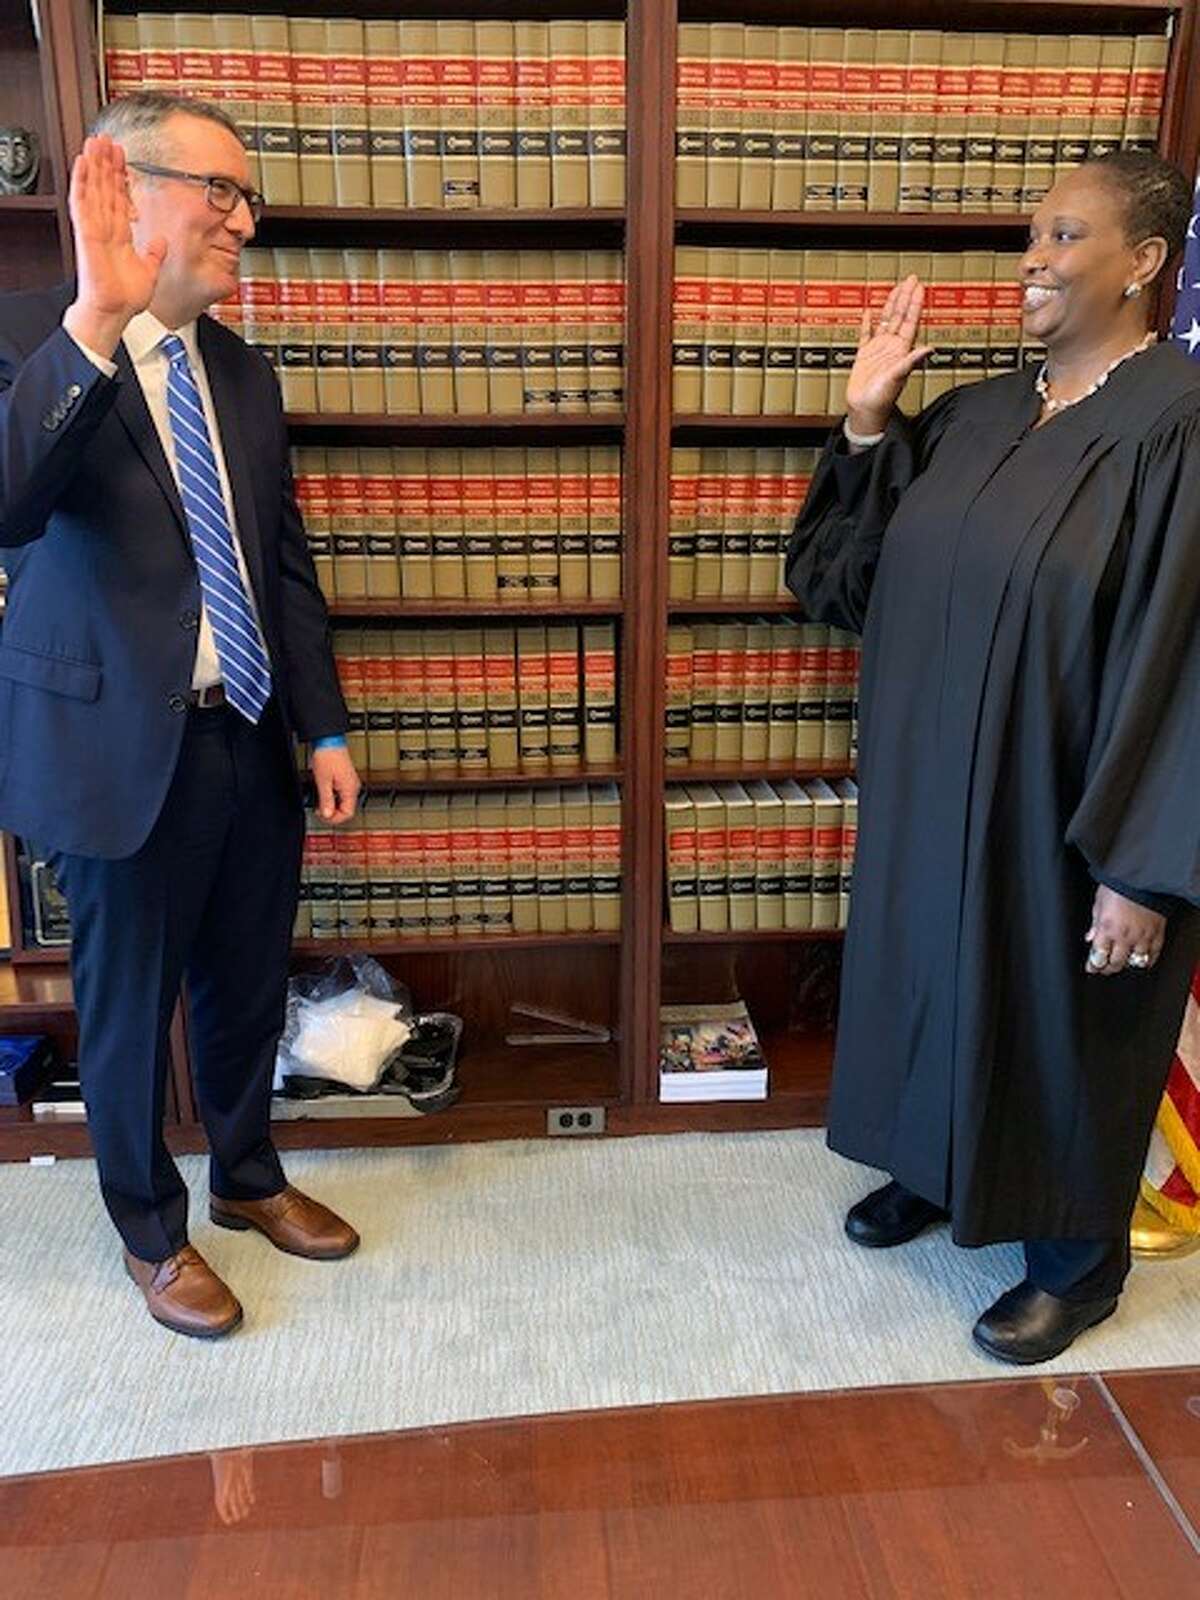 Acting U.S. Attorney Mark J. Lesko, who was a member of the trial team that prosecuted NXIVM leader Keith Raniere,  being sworn in by U.S. Chief Judge for the Eastern District of New York Margo K. Brodie at the federal courthouse in Brooklyn.